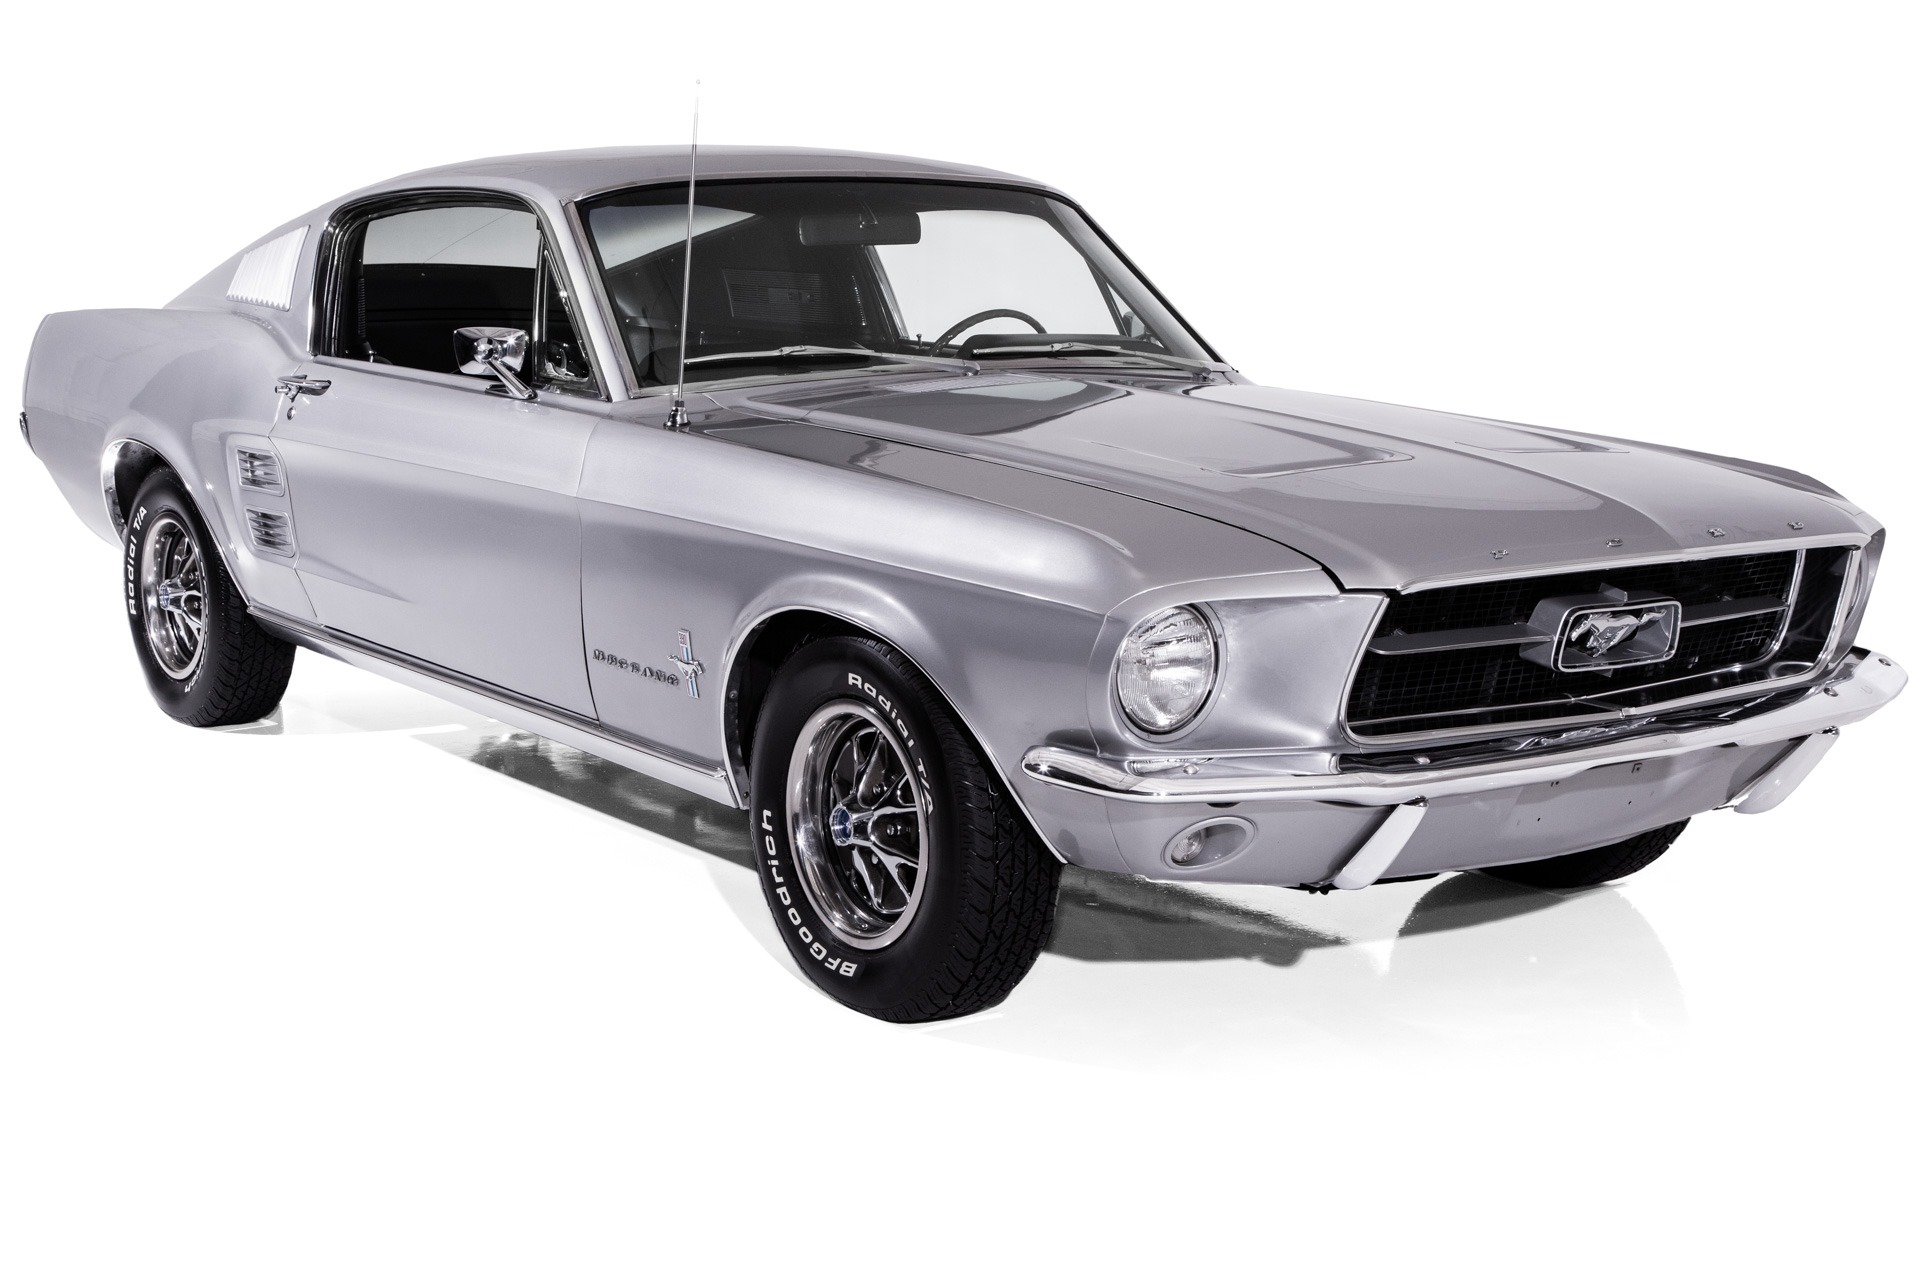 For Sale Used 1967 Ford Mustang Fastback Silver/Black 390 4-Speed | American Dream Machines Des Moines IA 50309